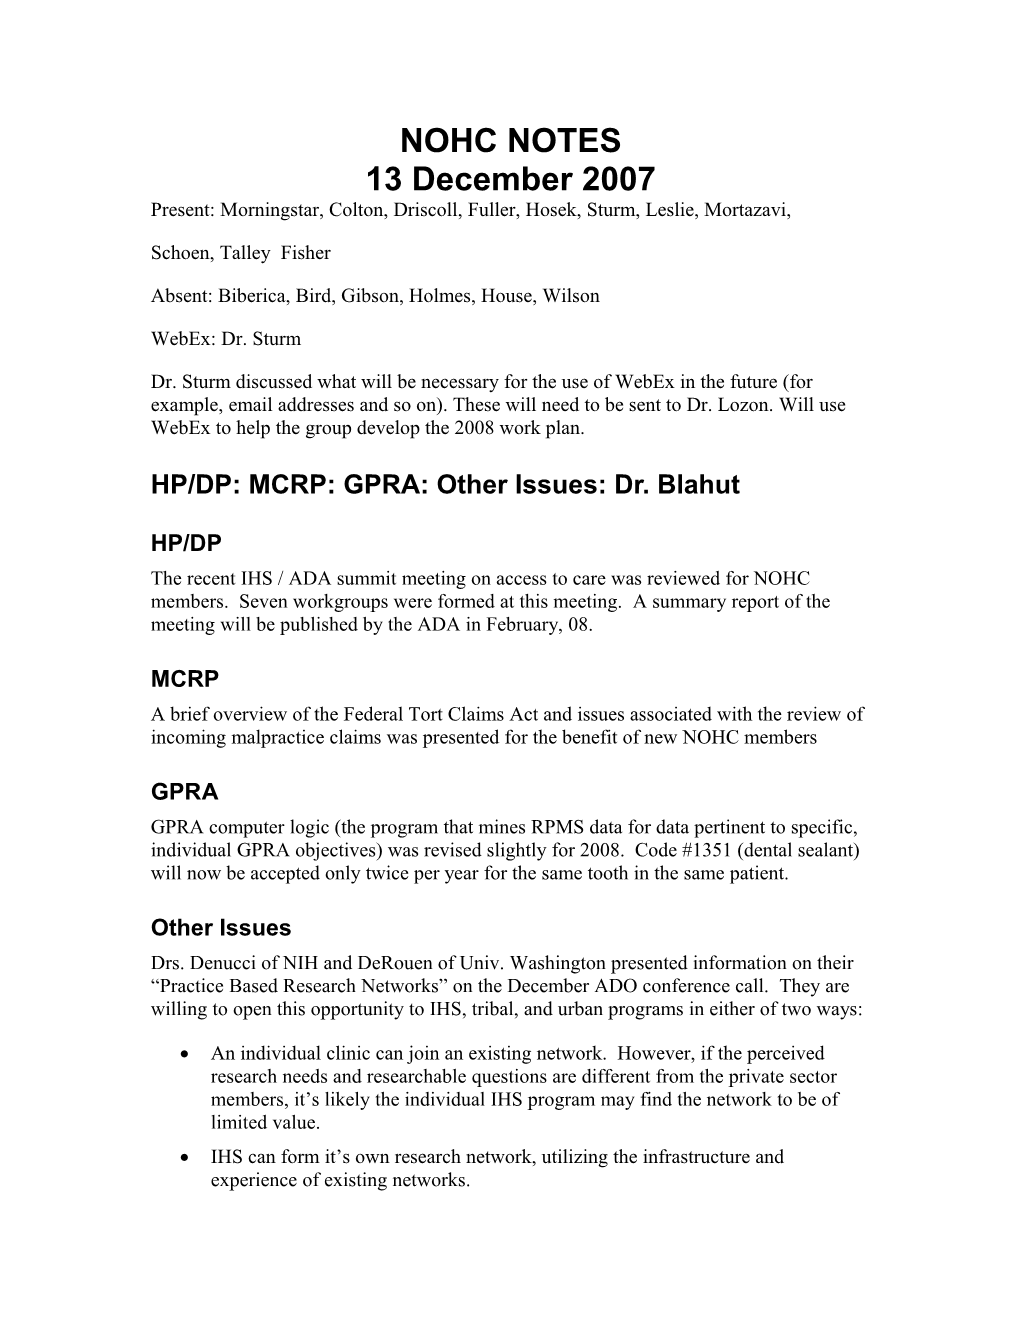 December 2007 NOHC Conference Call Notes